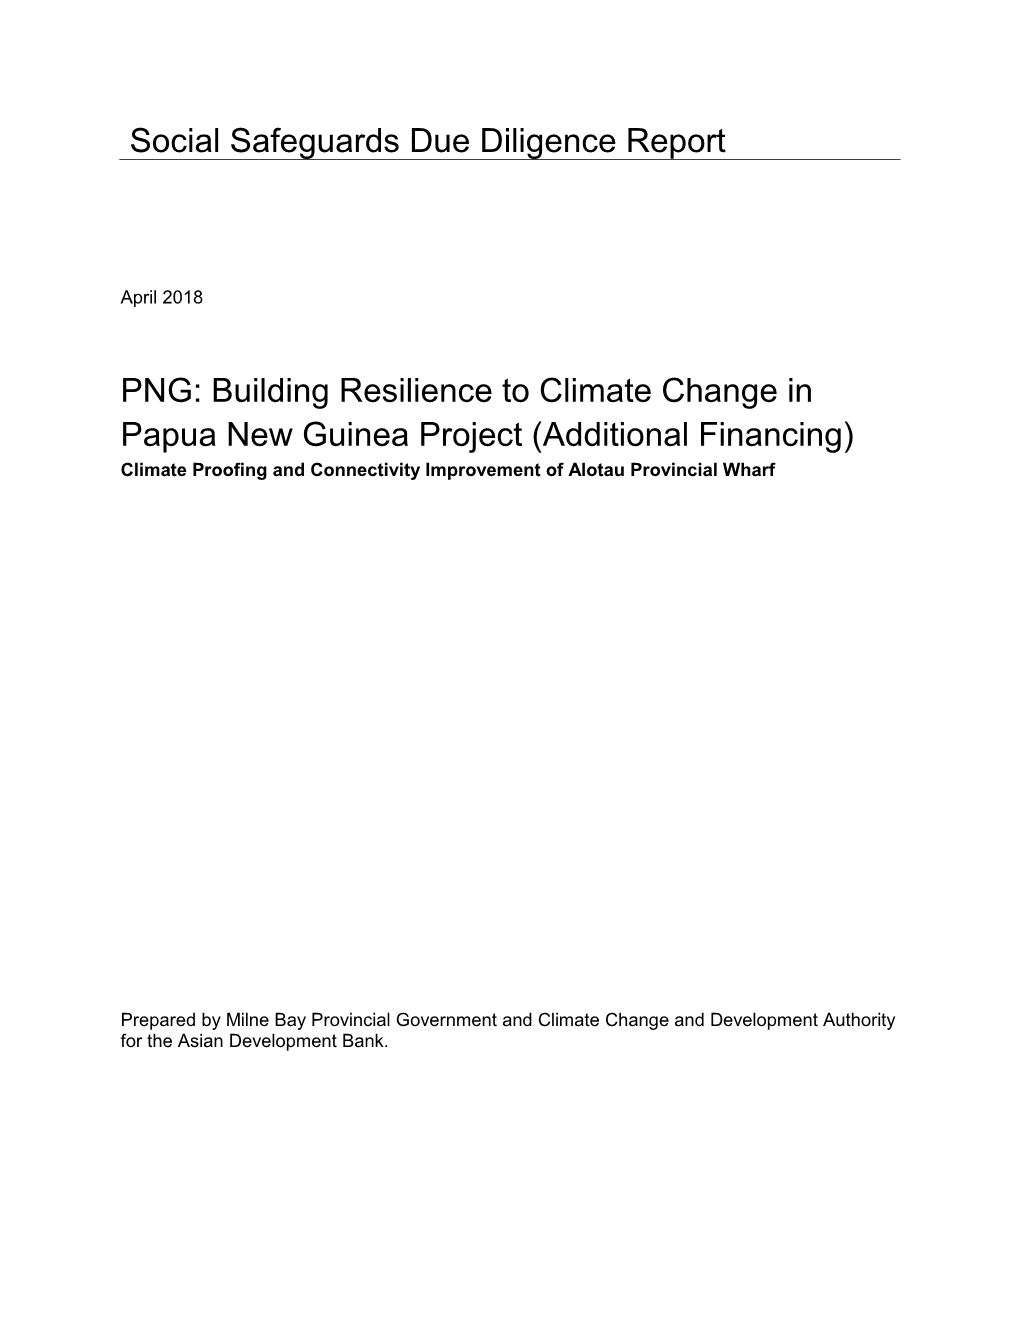 46495-003: Building Resilience to Climate